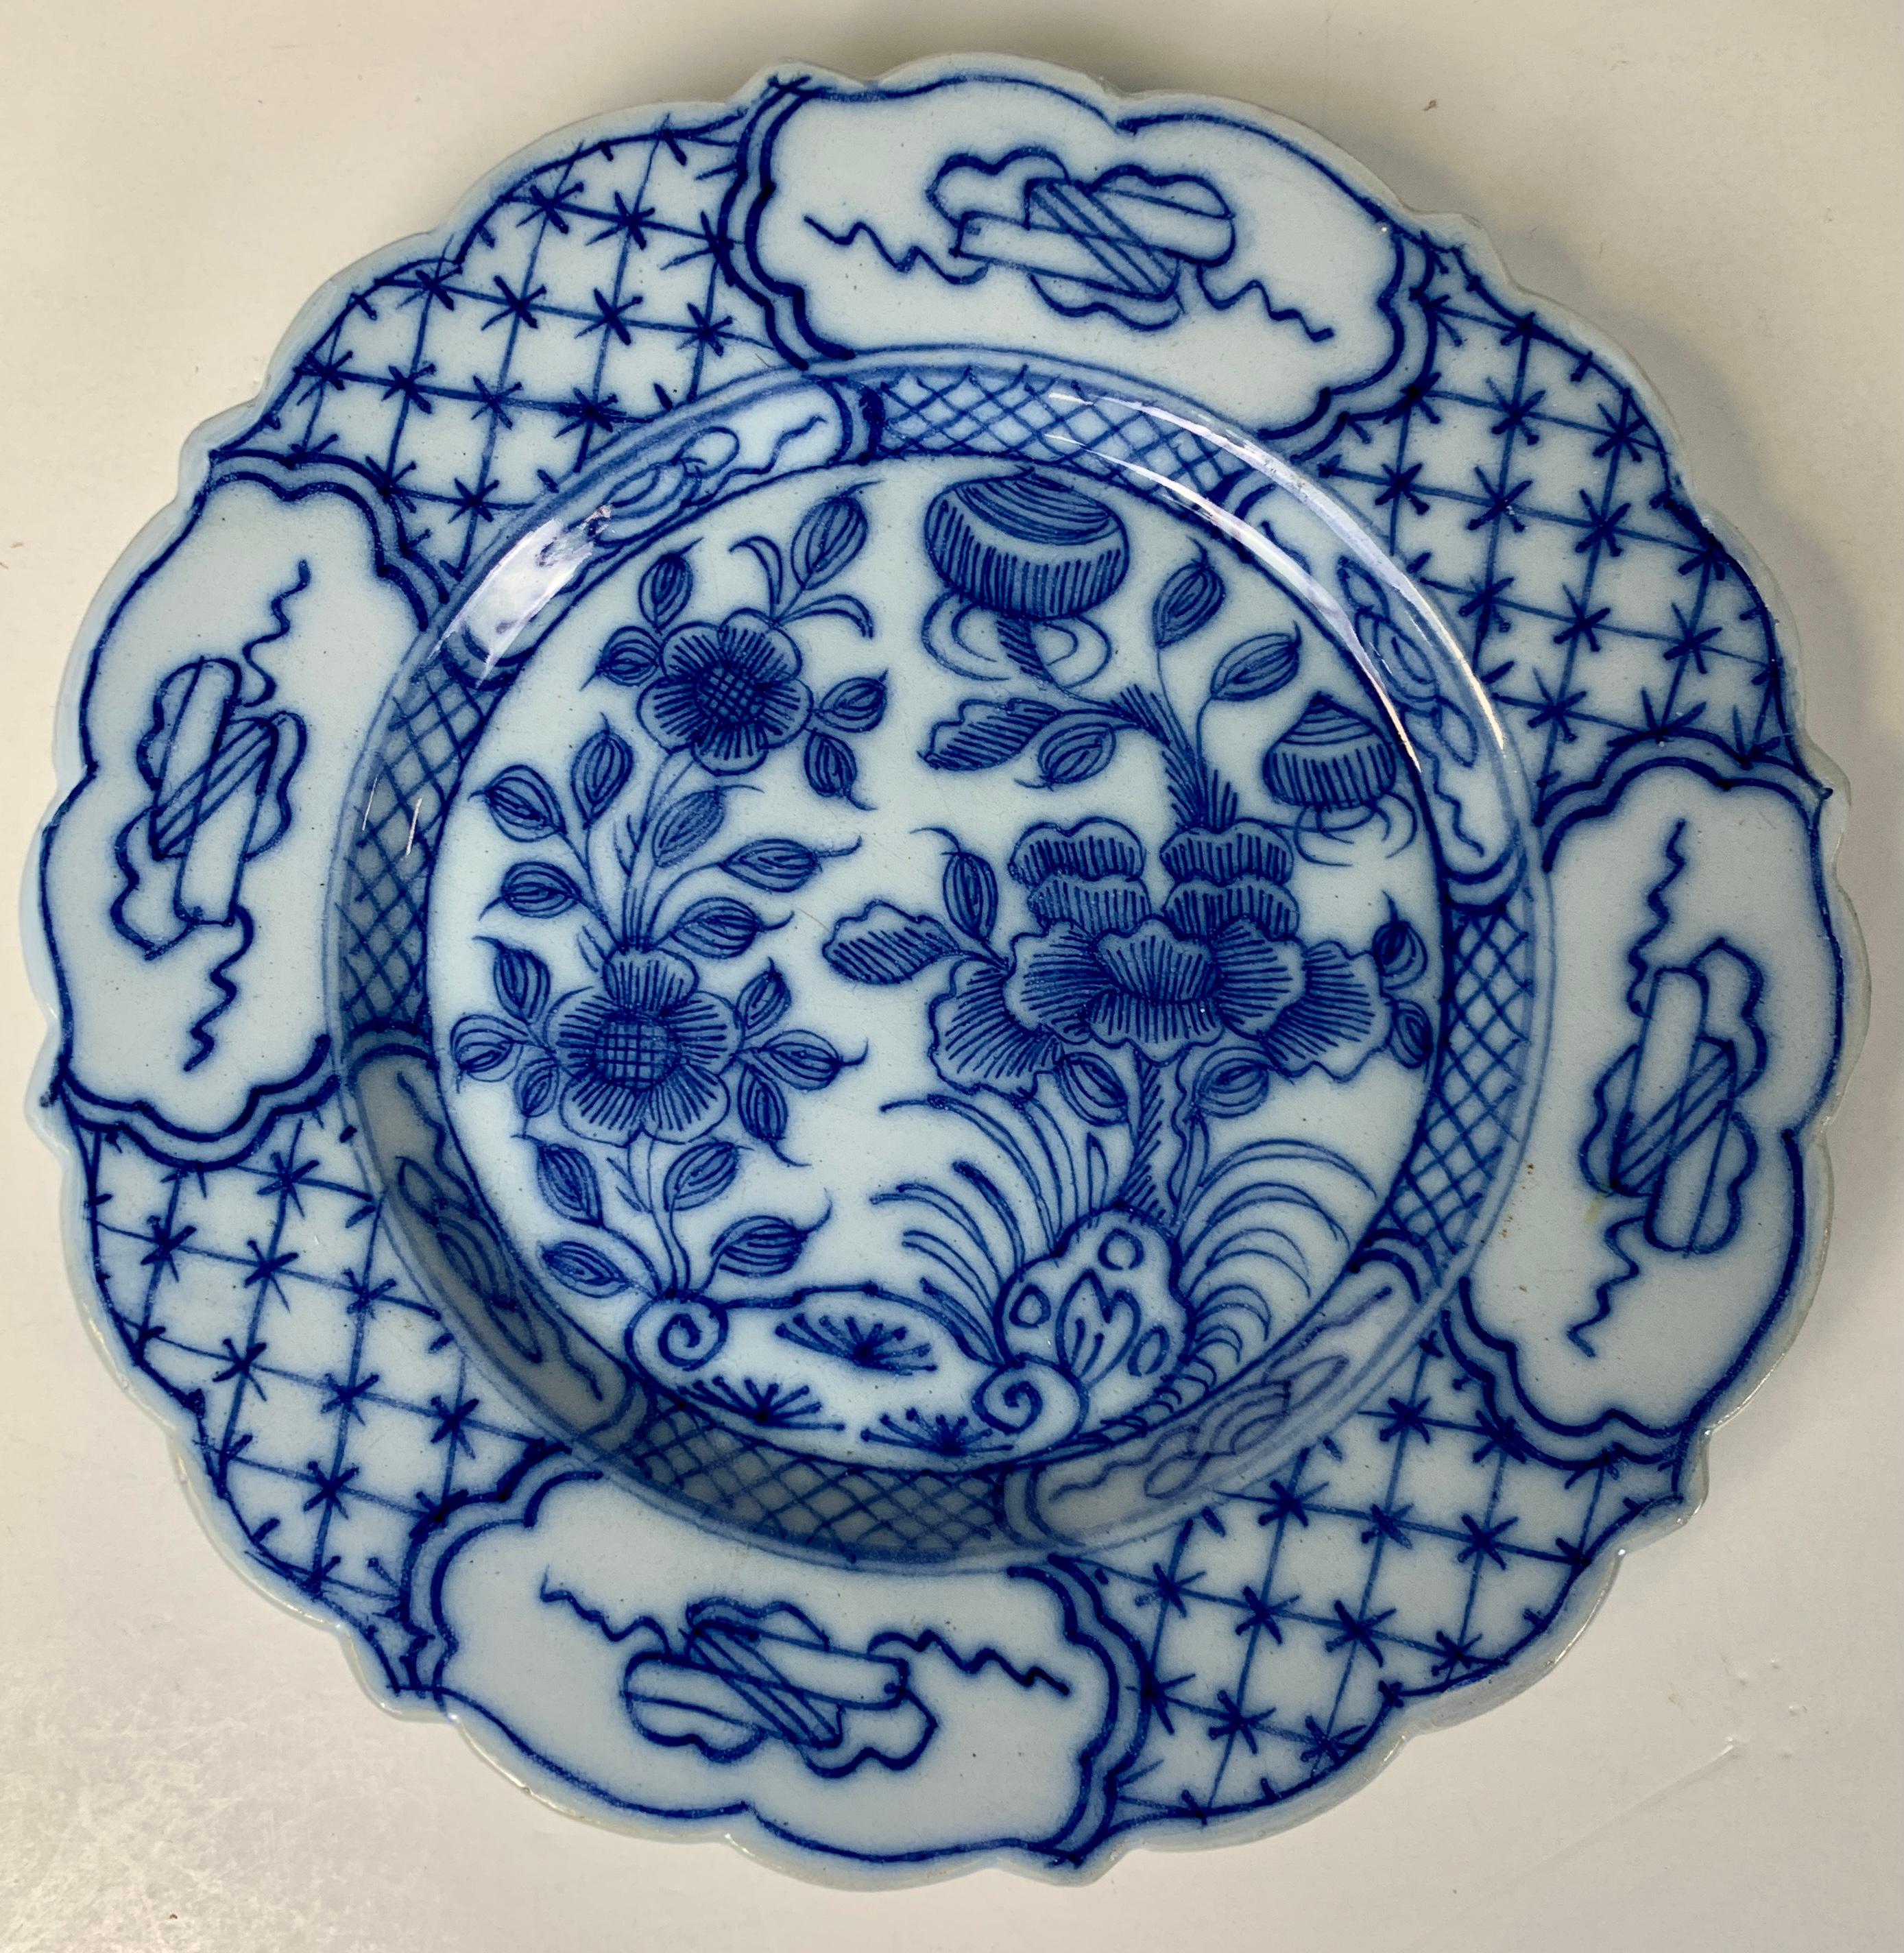 Chinoiserie Pair Blue and White Delft Dishes Hand-Painted, Circa 1780